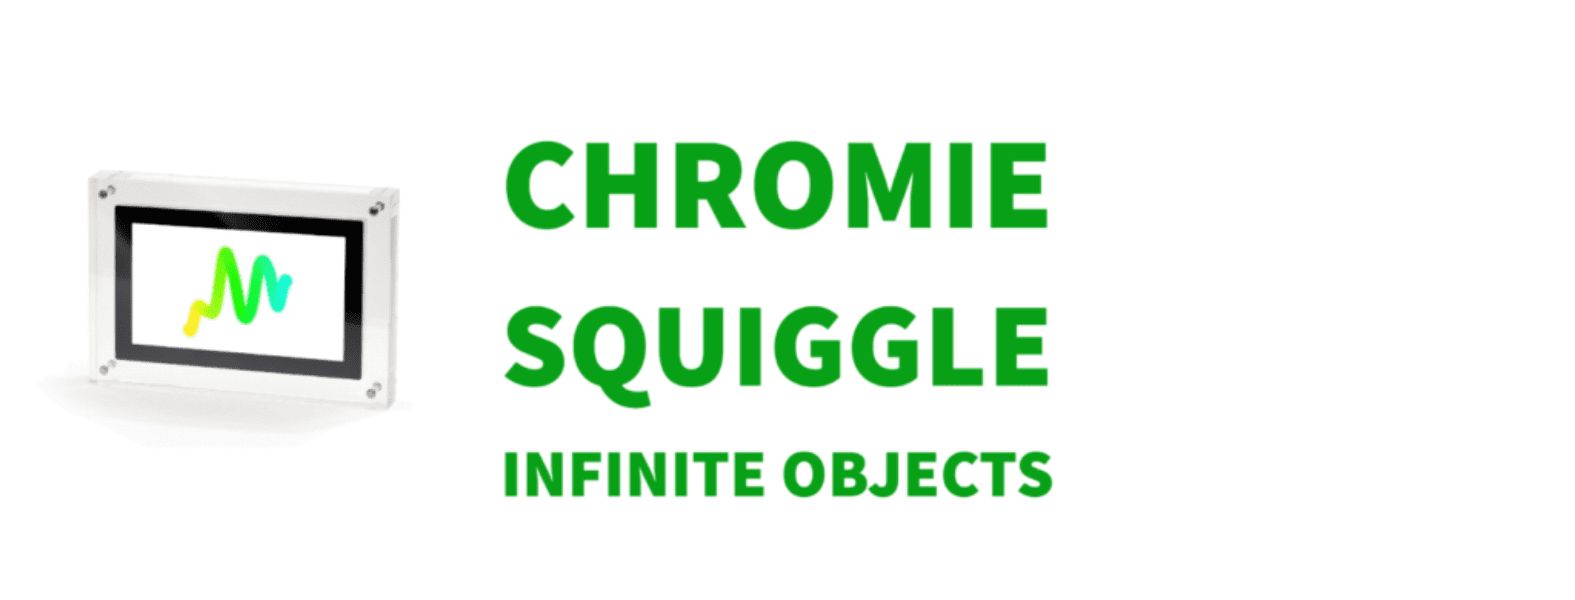 chromie squiggle infinite objects-1